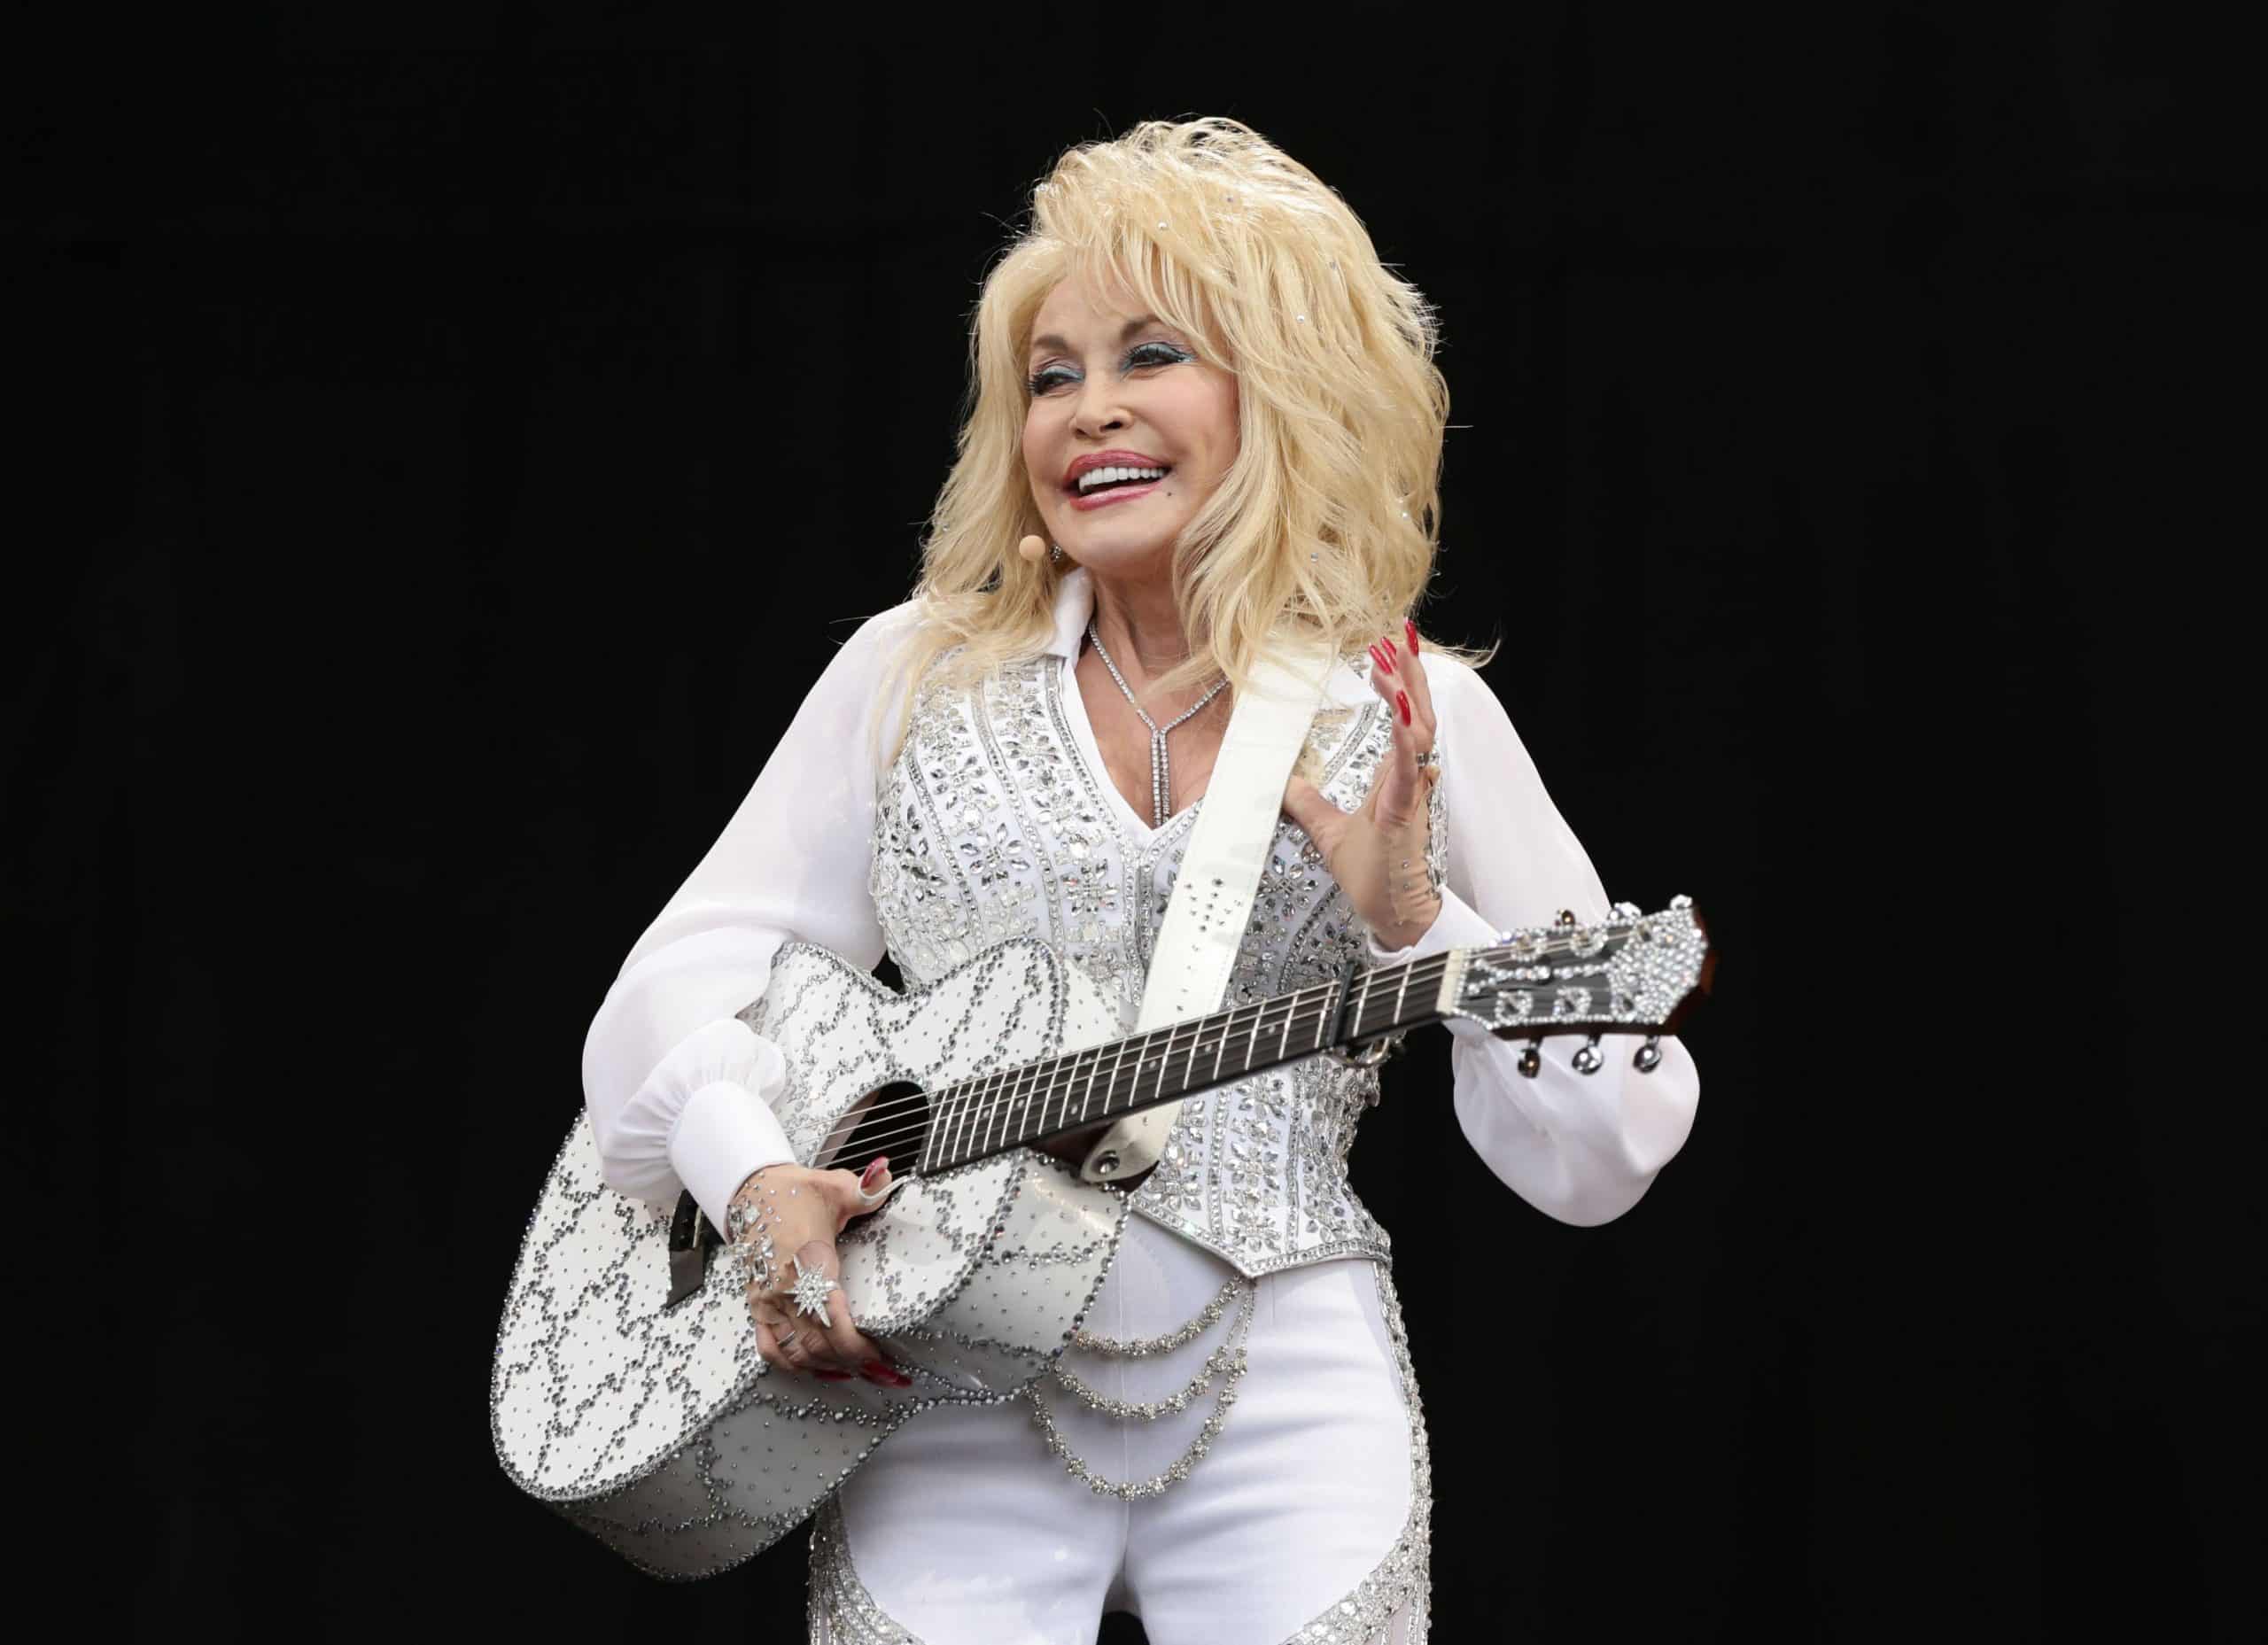 Dolly Parton did something amazing with $10m of Whitney Houston song royalties